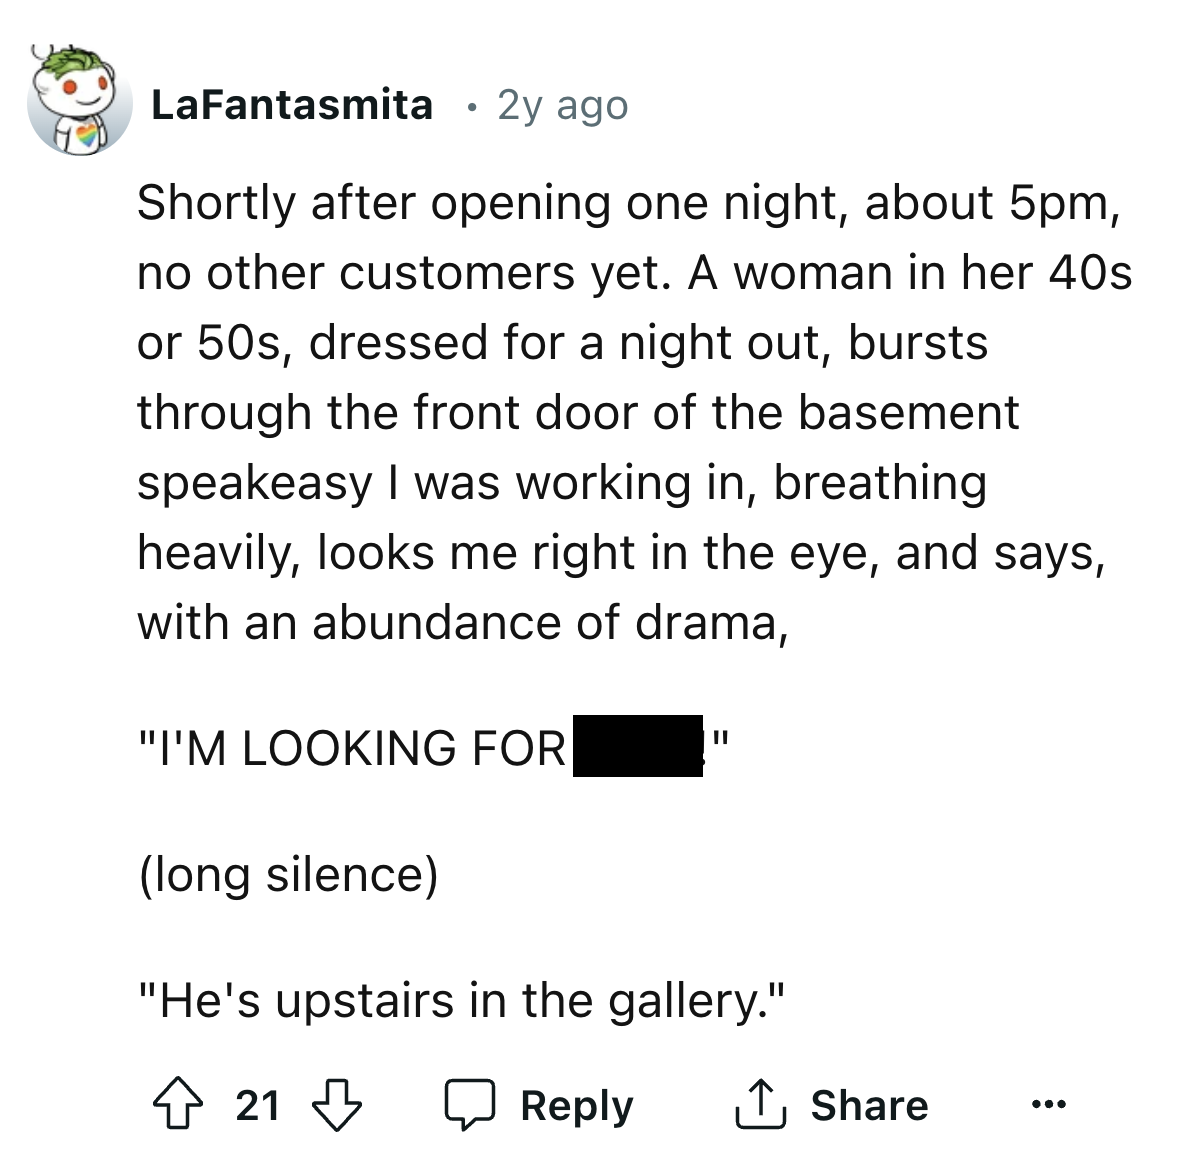 screenshot - LaFantasmita 2y ago Shortly after opening one night, about 5pm, no other customers yet. A woman in her 40s or 50s, dressed for a night out, bursts. through the front door of the basement speakeasy I was working in, breathing heavily, looks me